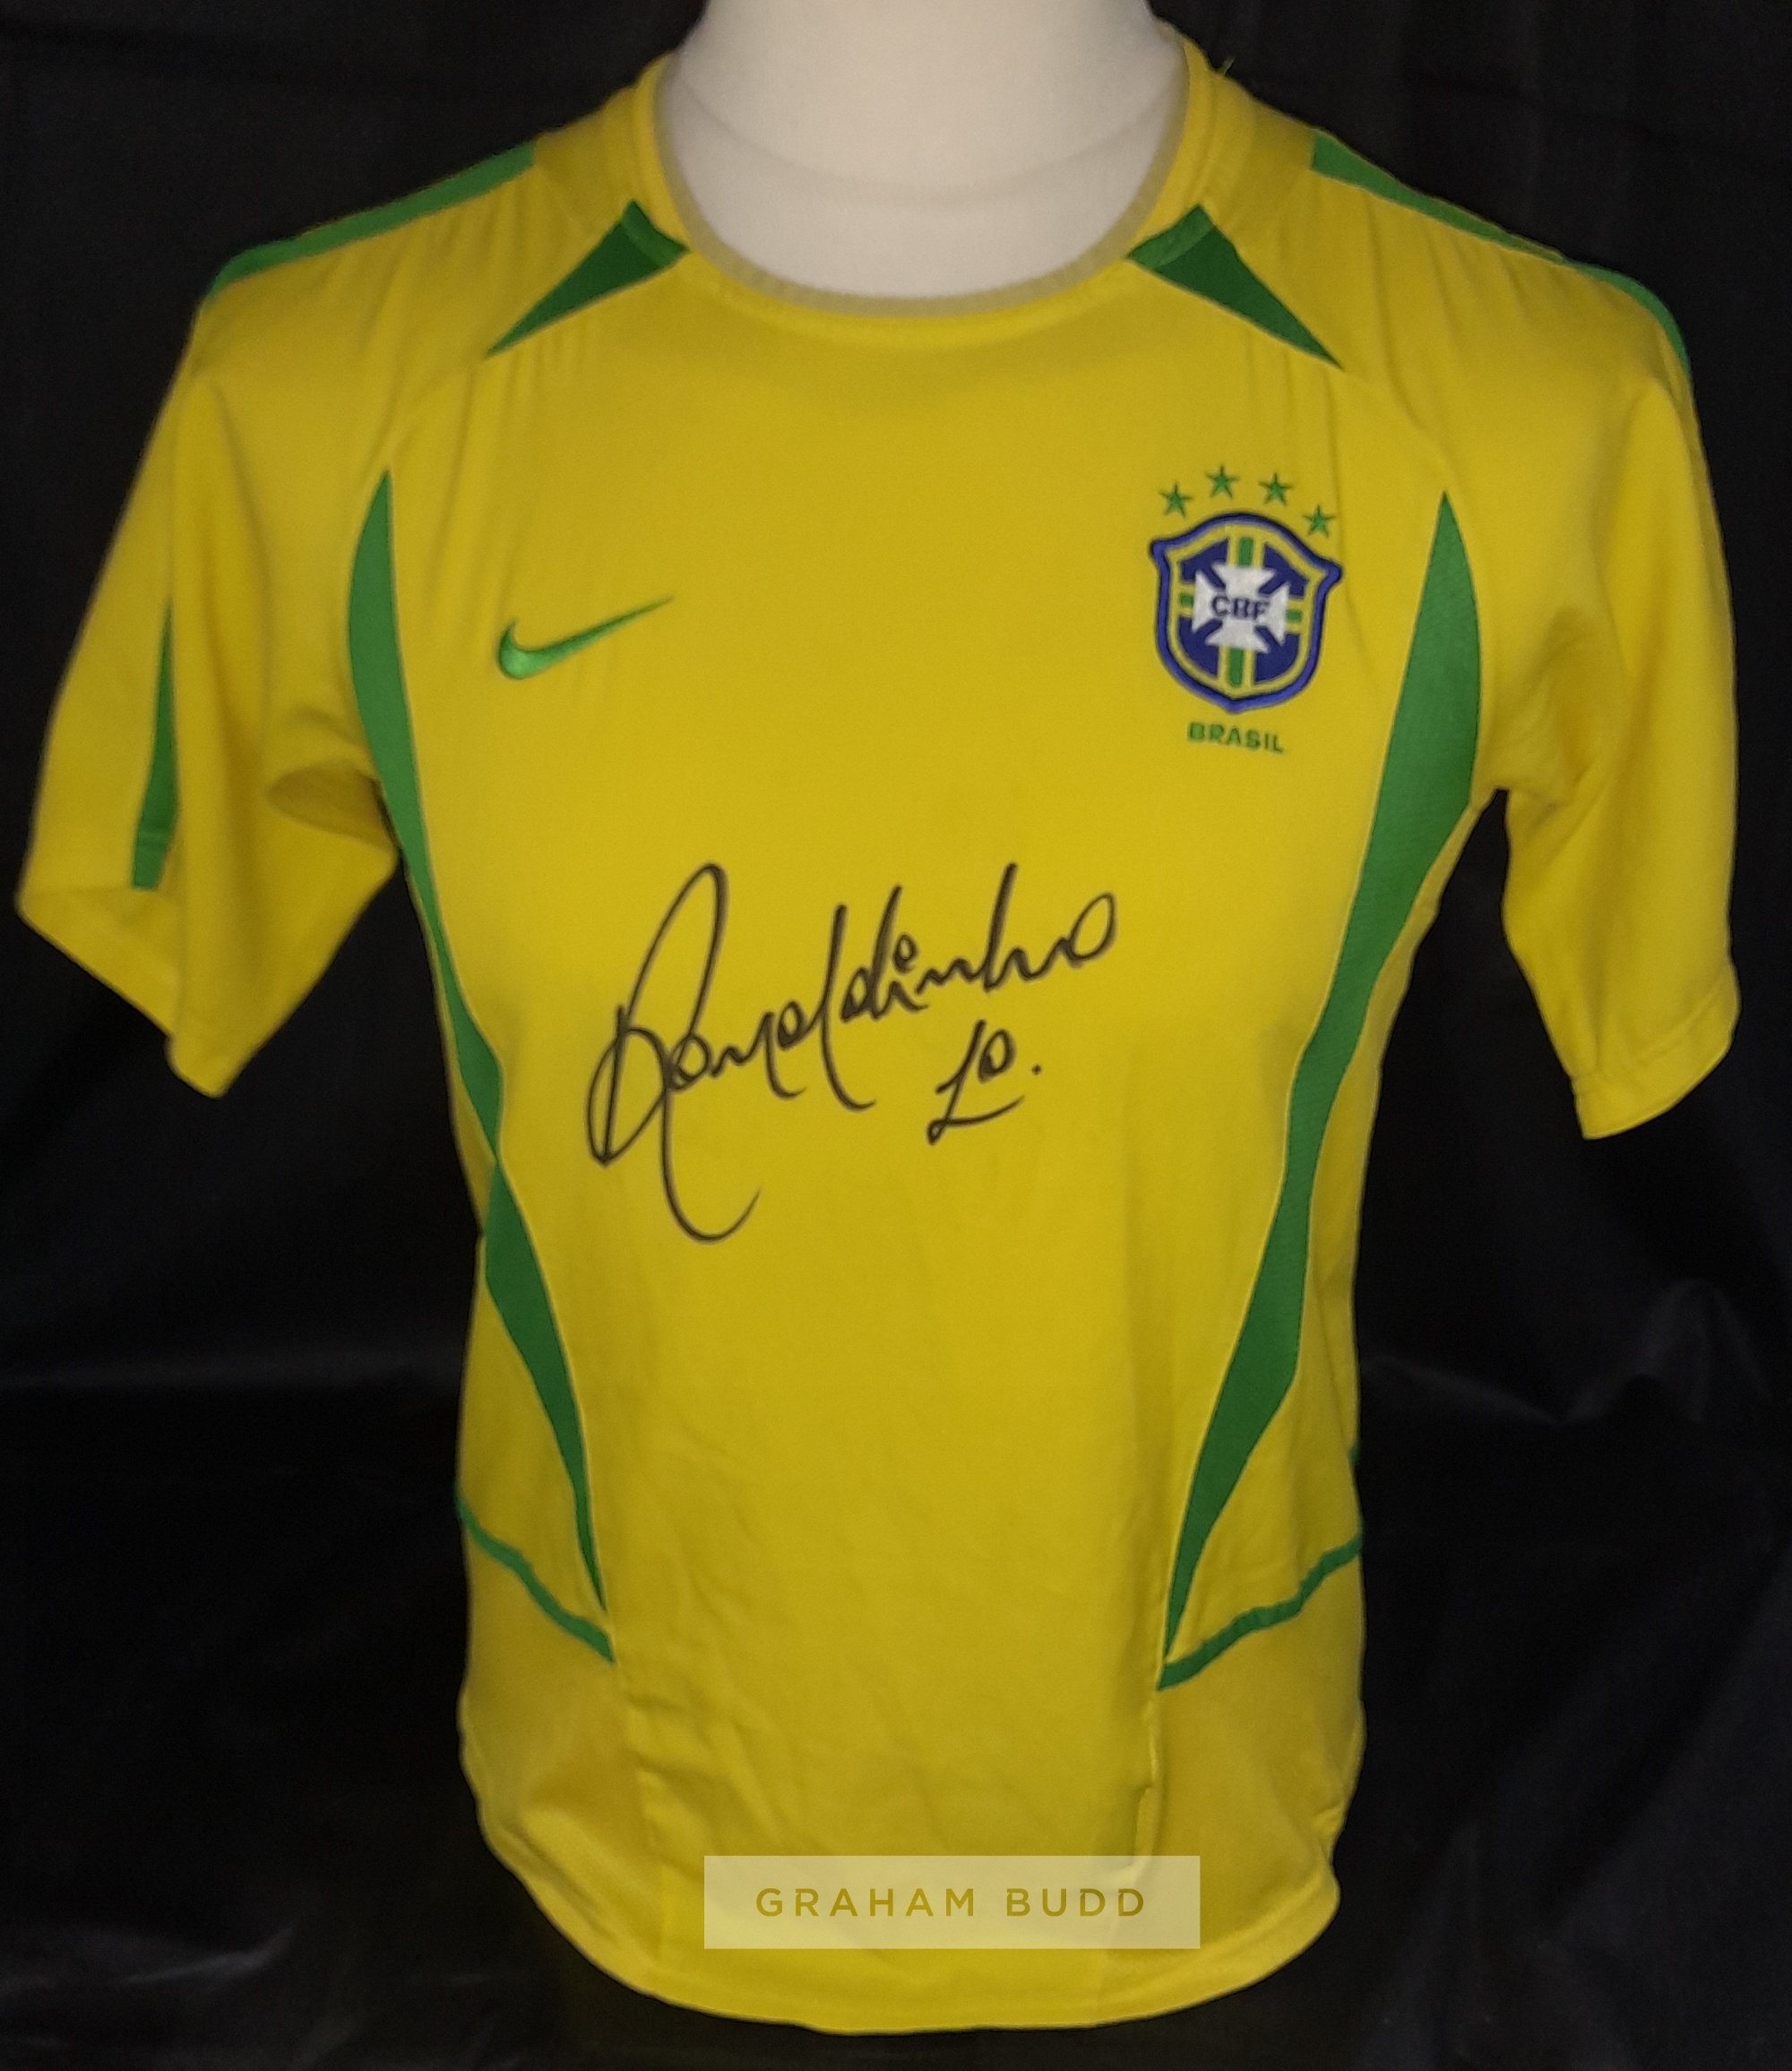 Brazil 2002 World Cup replica winning jersey signed by the enigmatic Ronaldinho boldly across